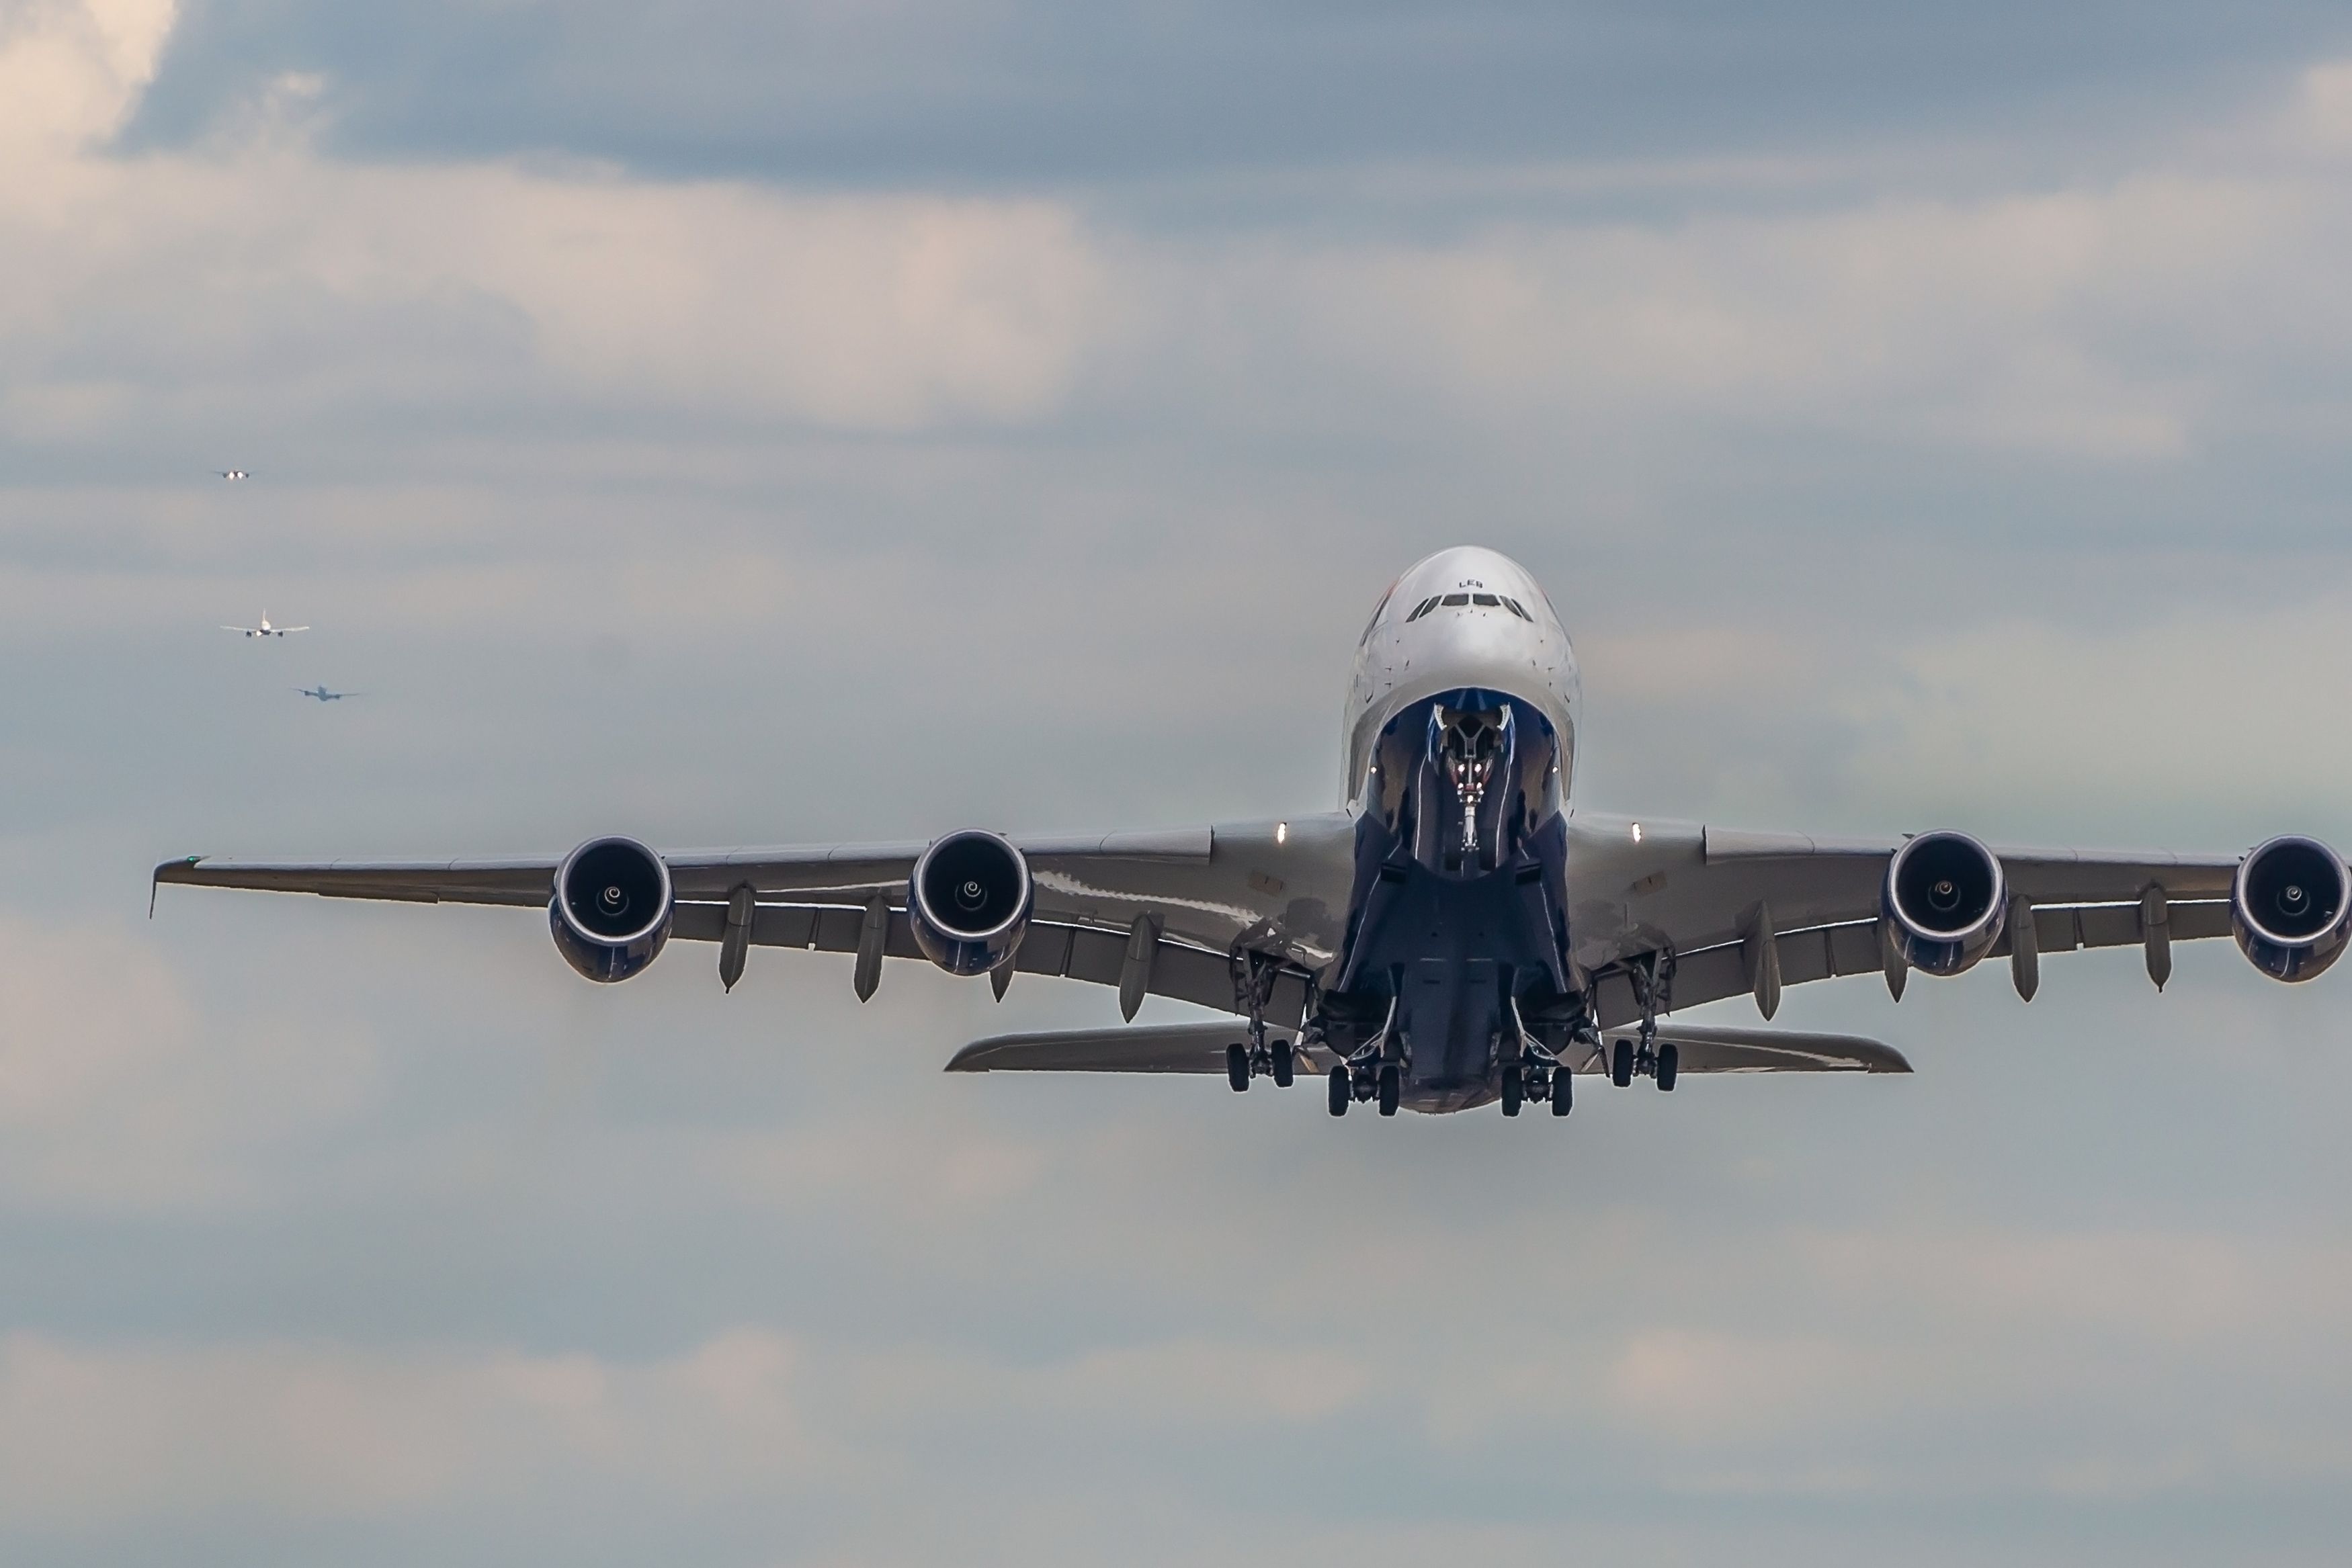 British Airways Airbus A380 departing from London Heathrow Airport. 